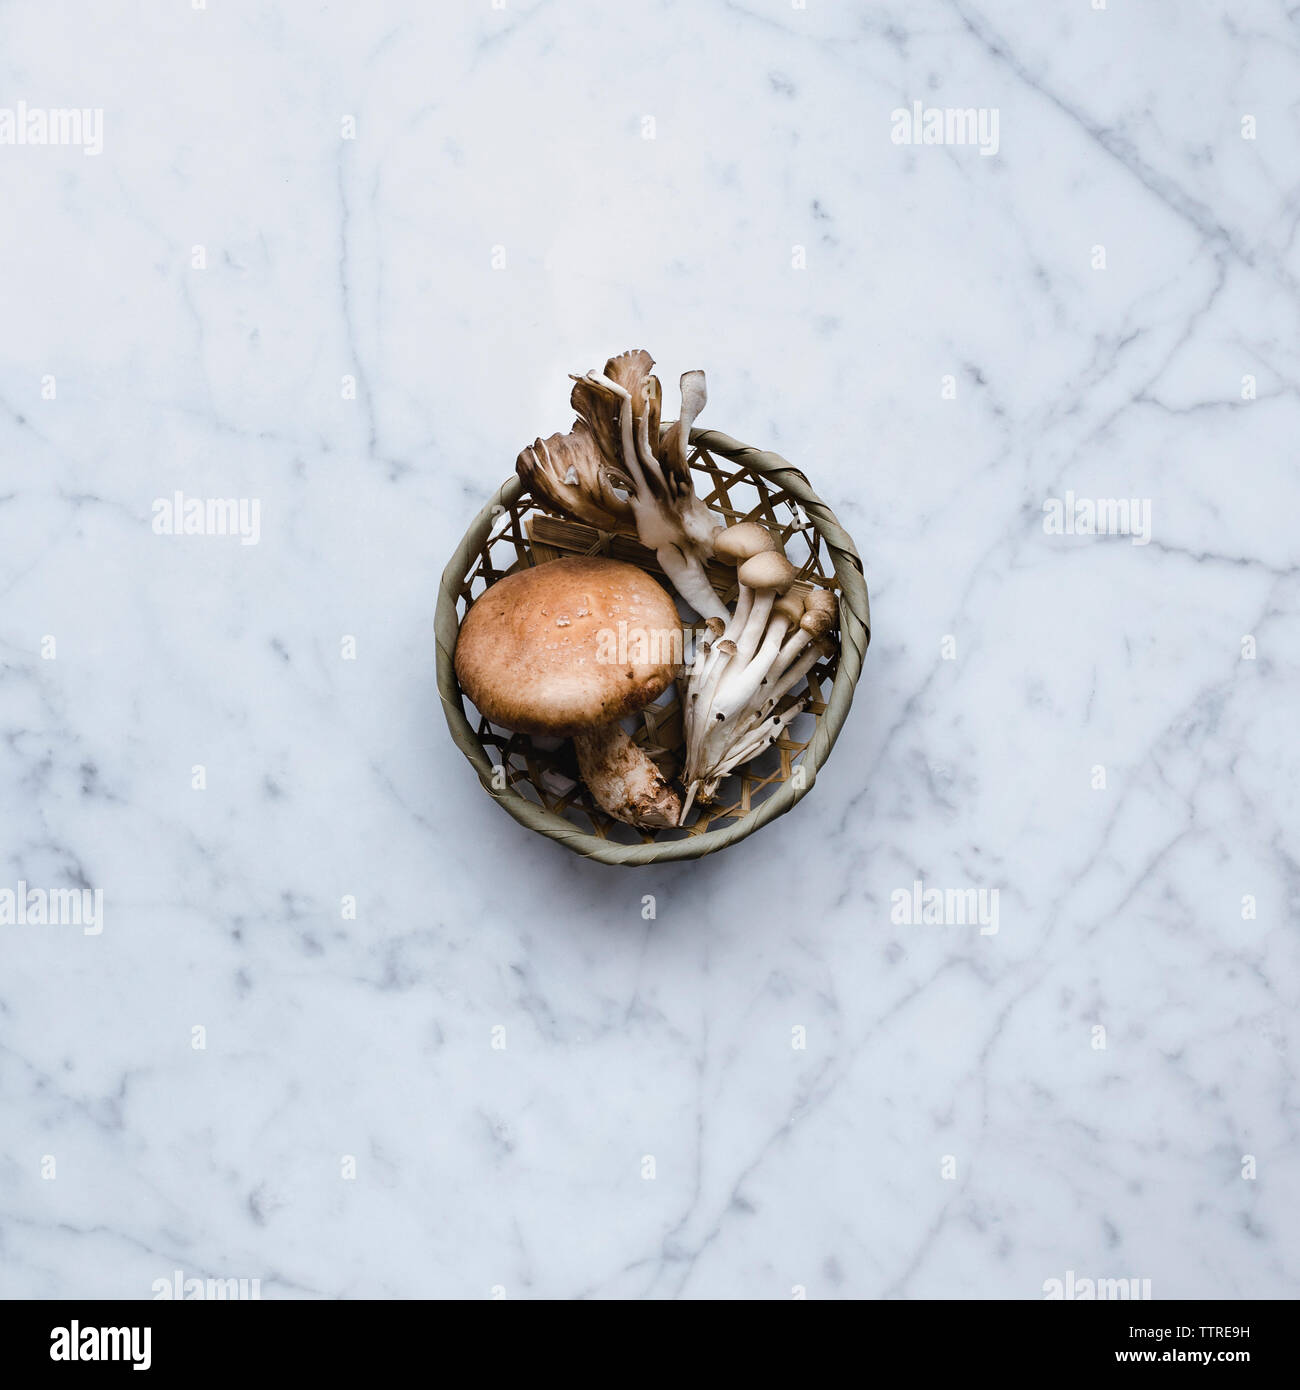 Overhead view of edible mushrooms in basket on table Stock Photo